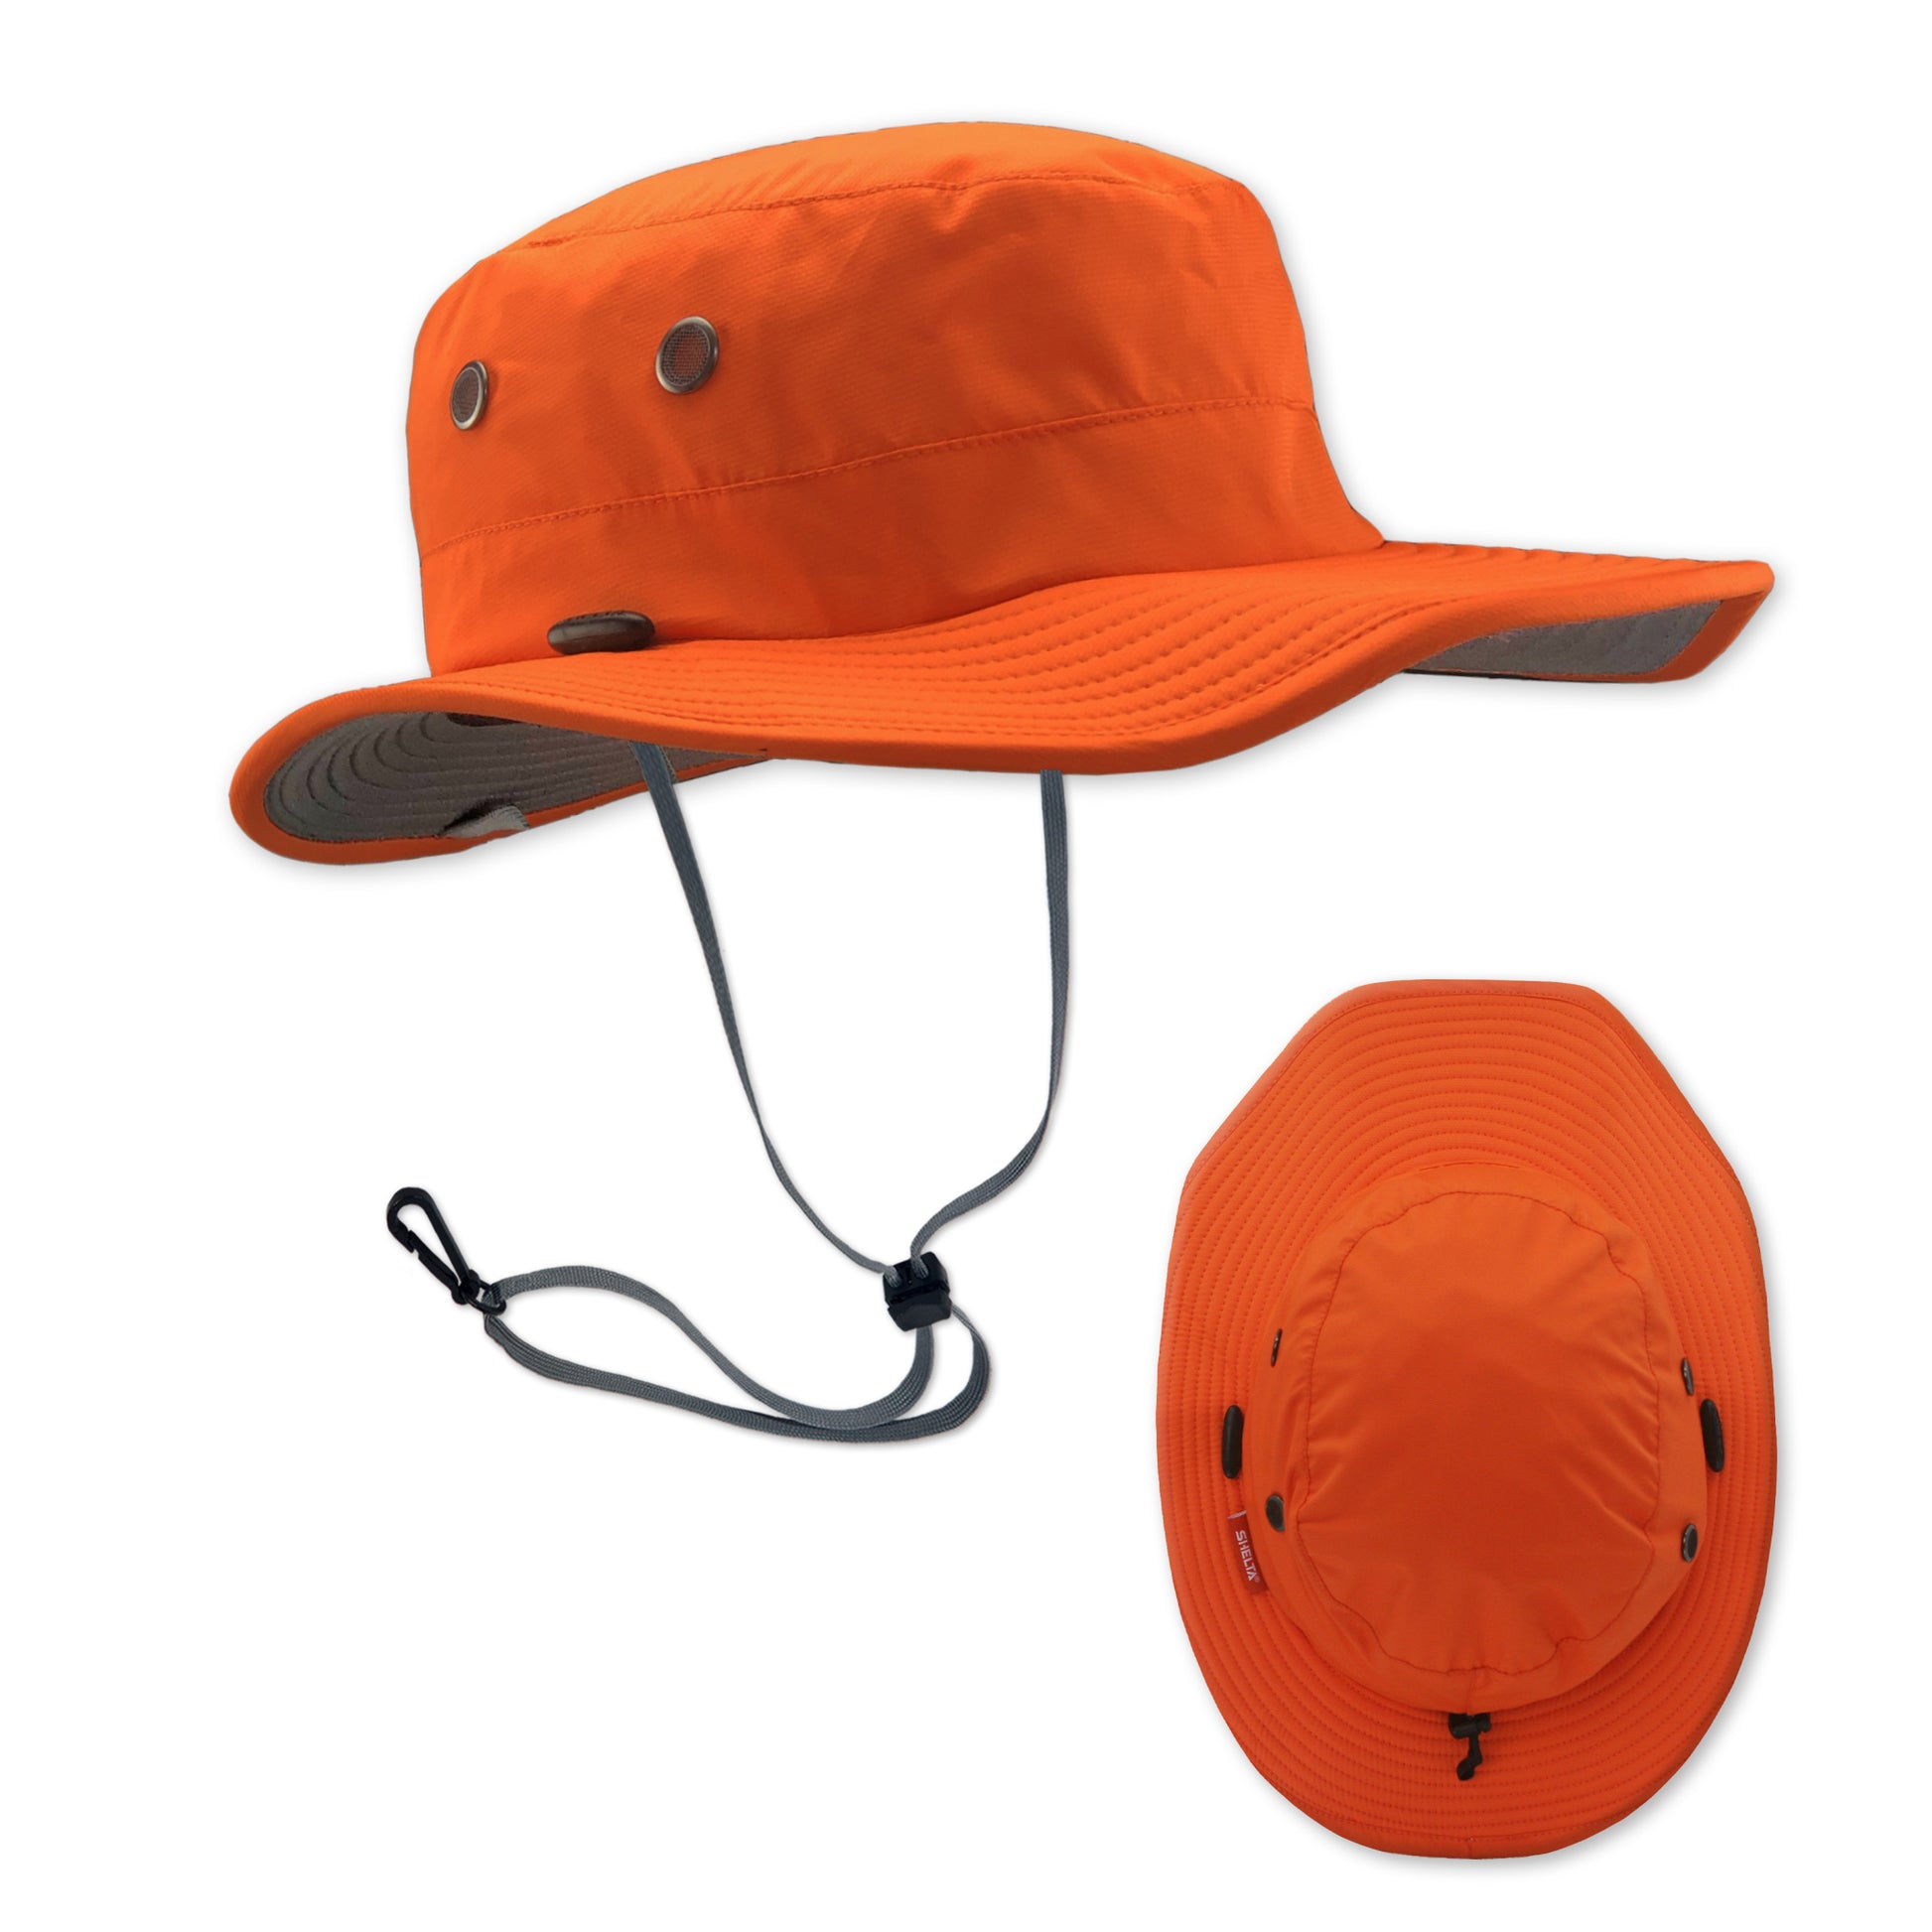 The Osprey Performance Sun Protection Hat in Dark Coal – Sheltahats